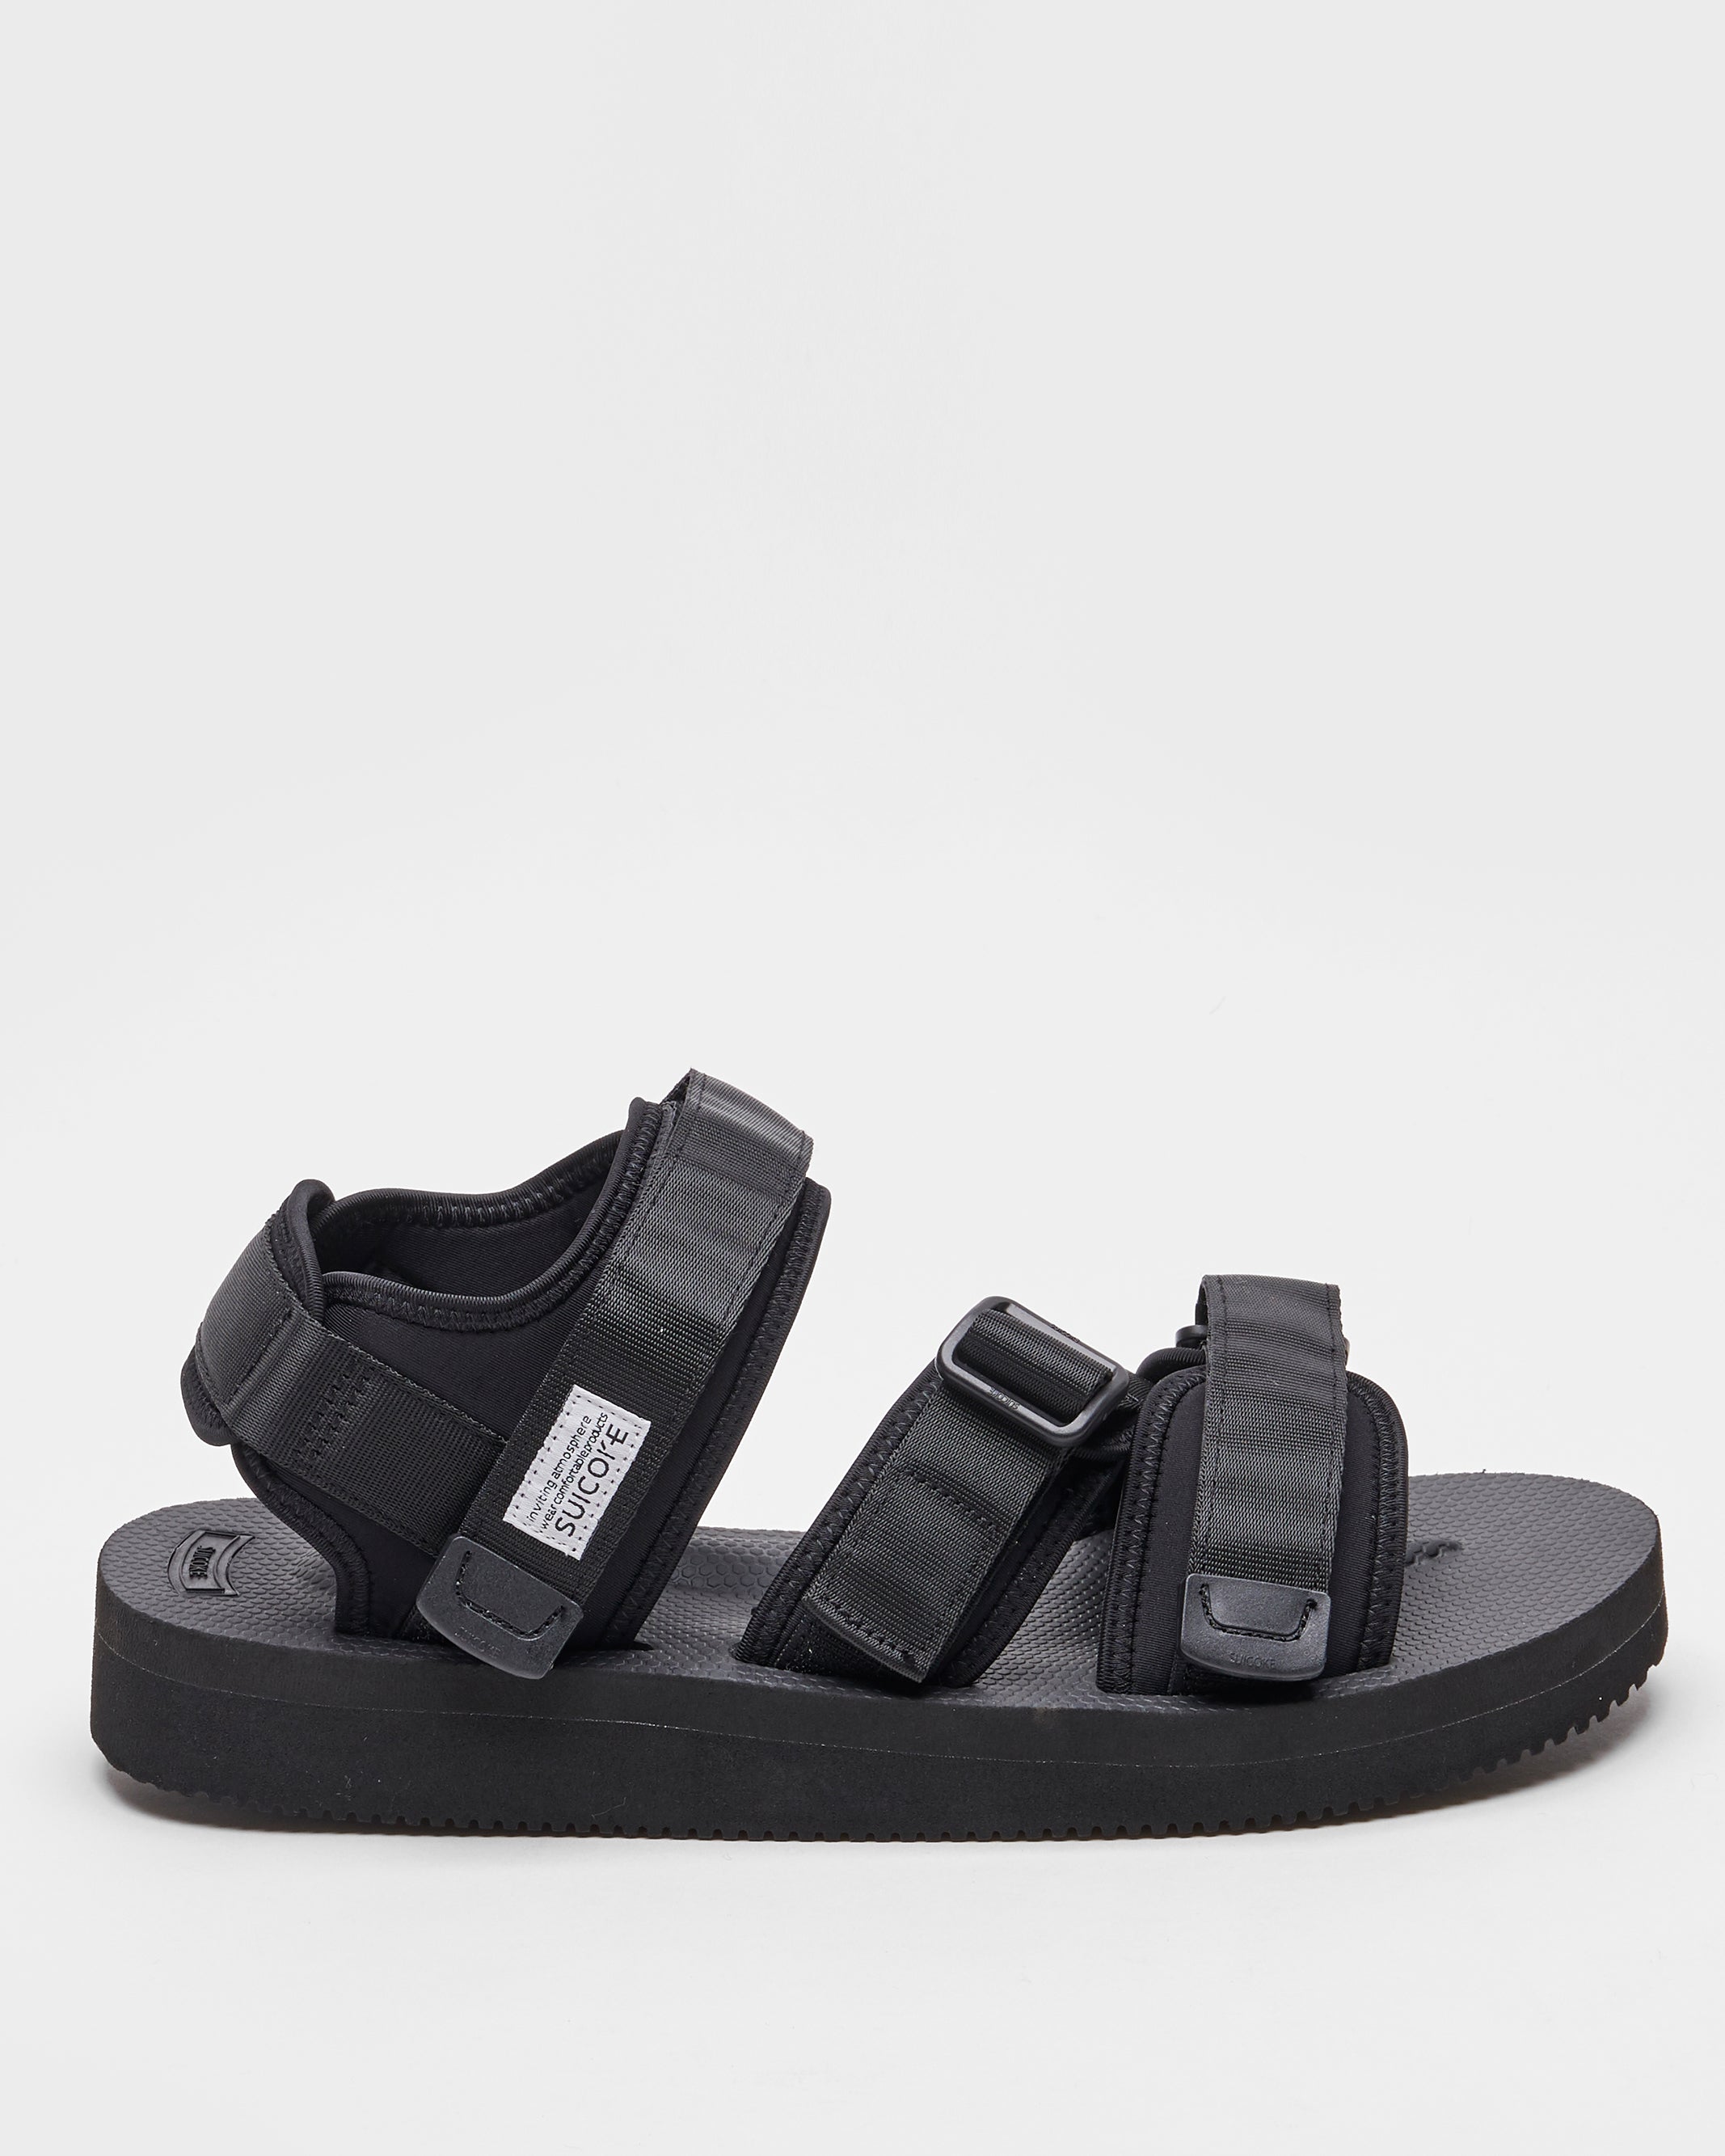 SUICOKE KISEE-V in Black OG-044V | Shop from eightywingold an official brand partner for SUICOKE Canada and US.